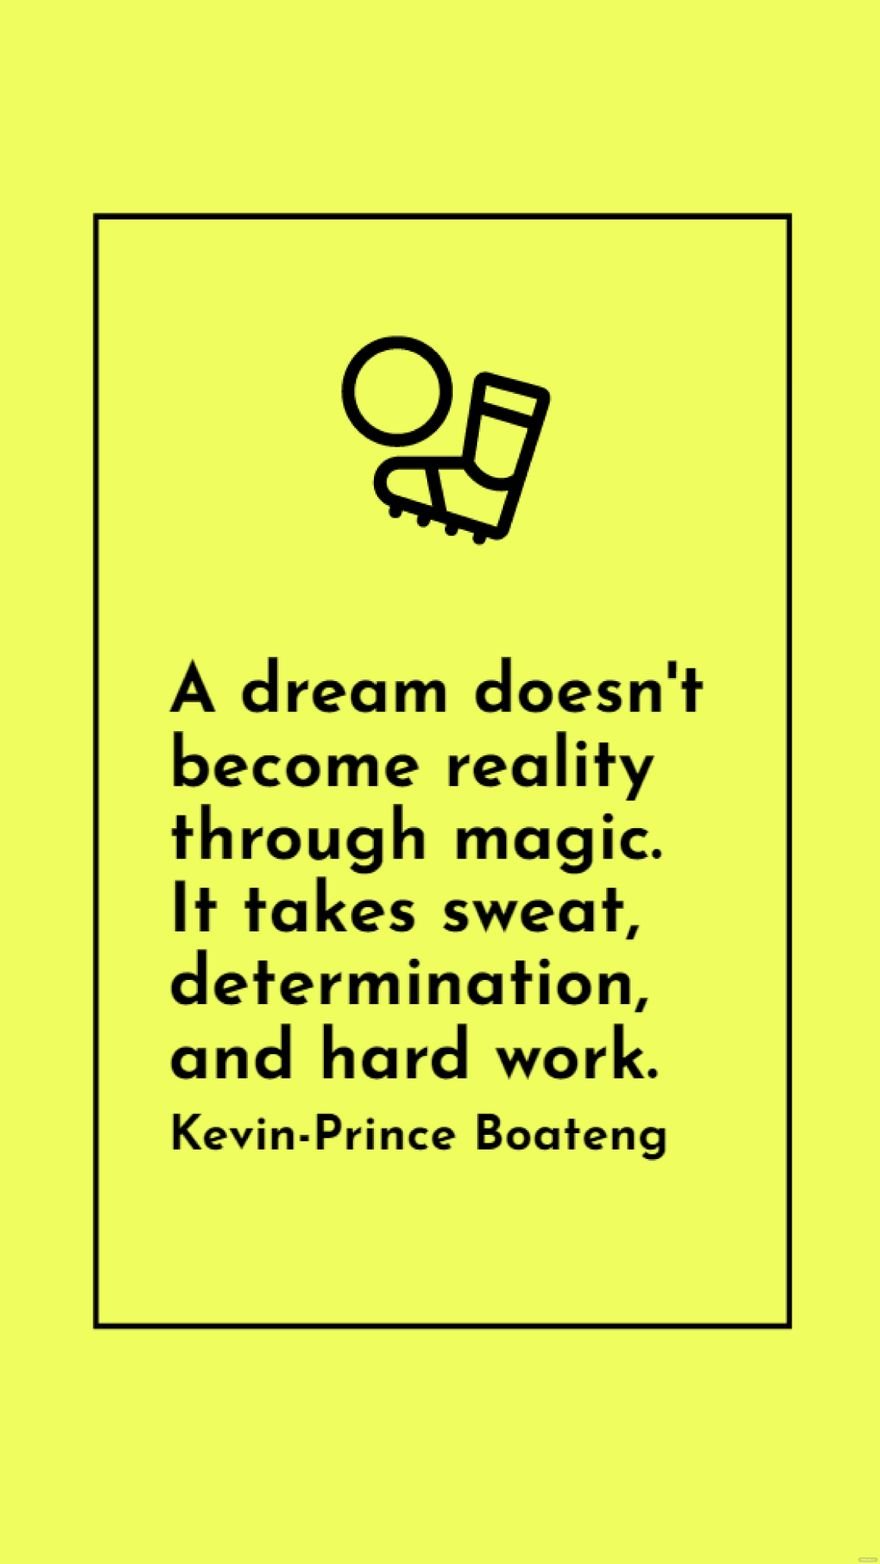 Kevin-Prince Boateng - A dream doesn't become reality through magic. It takes sweat, determination, and hard work. in JPG